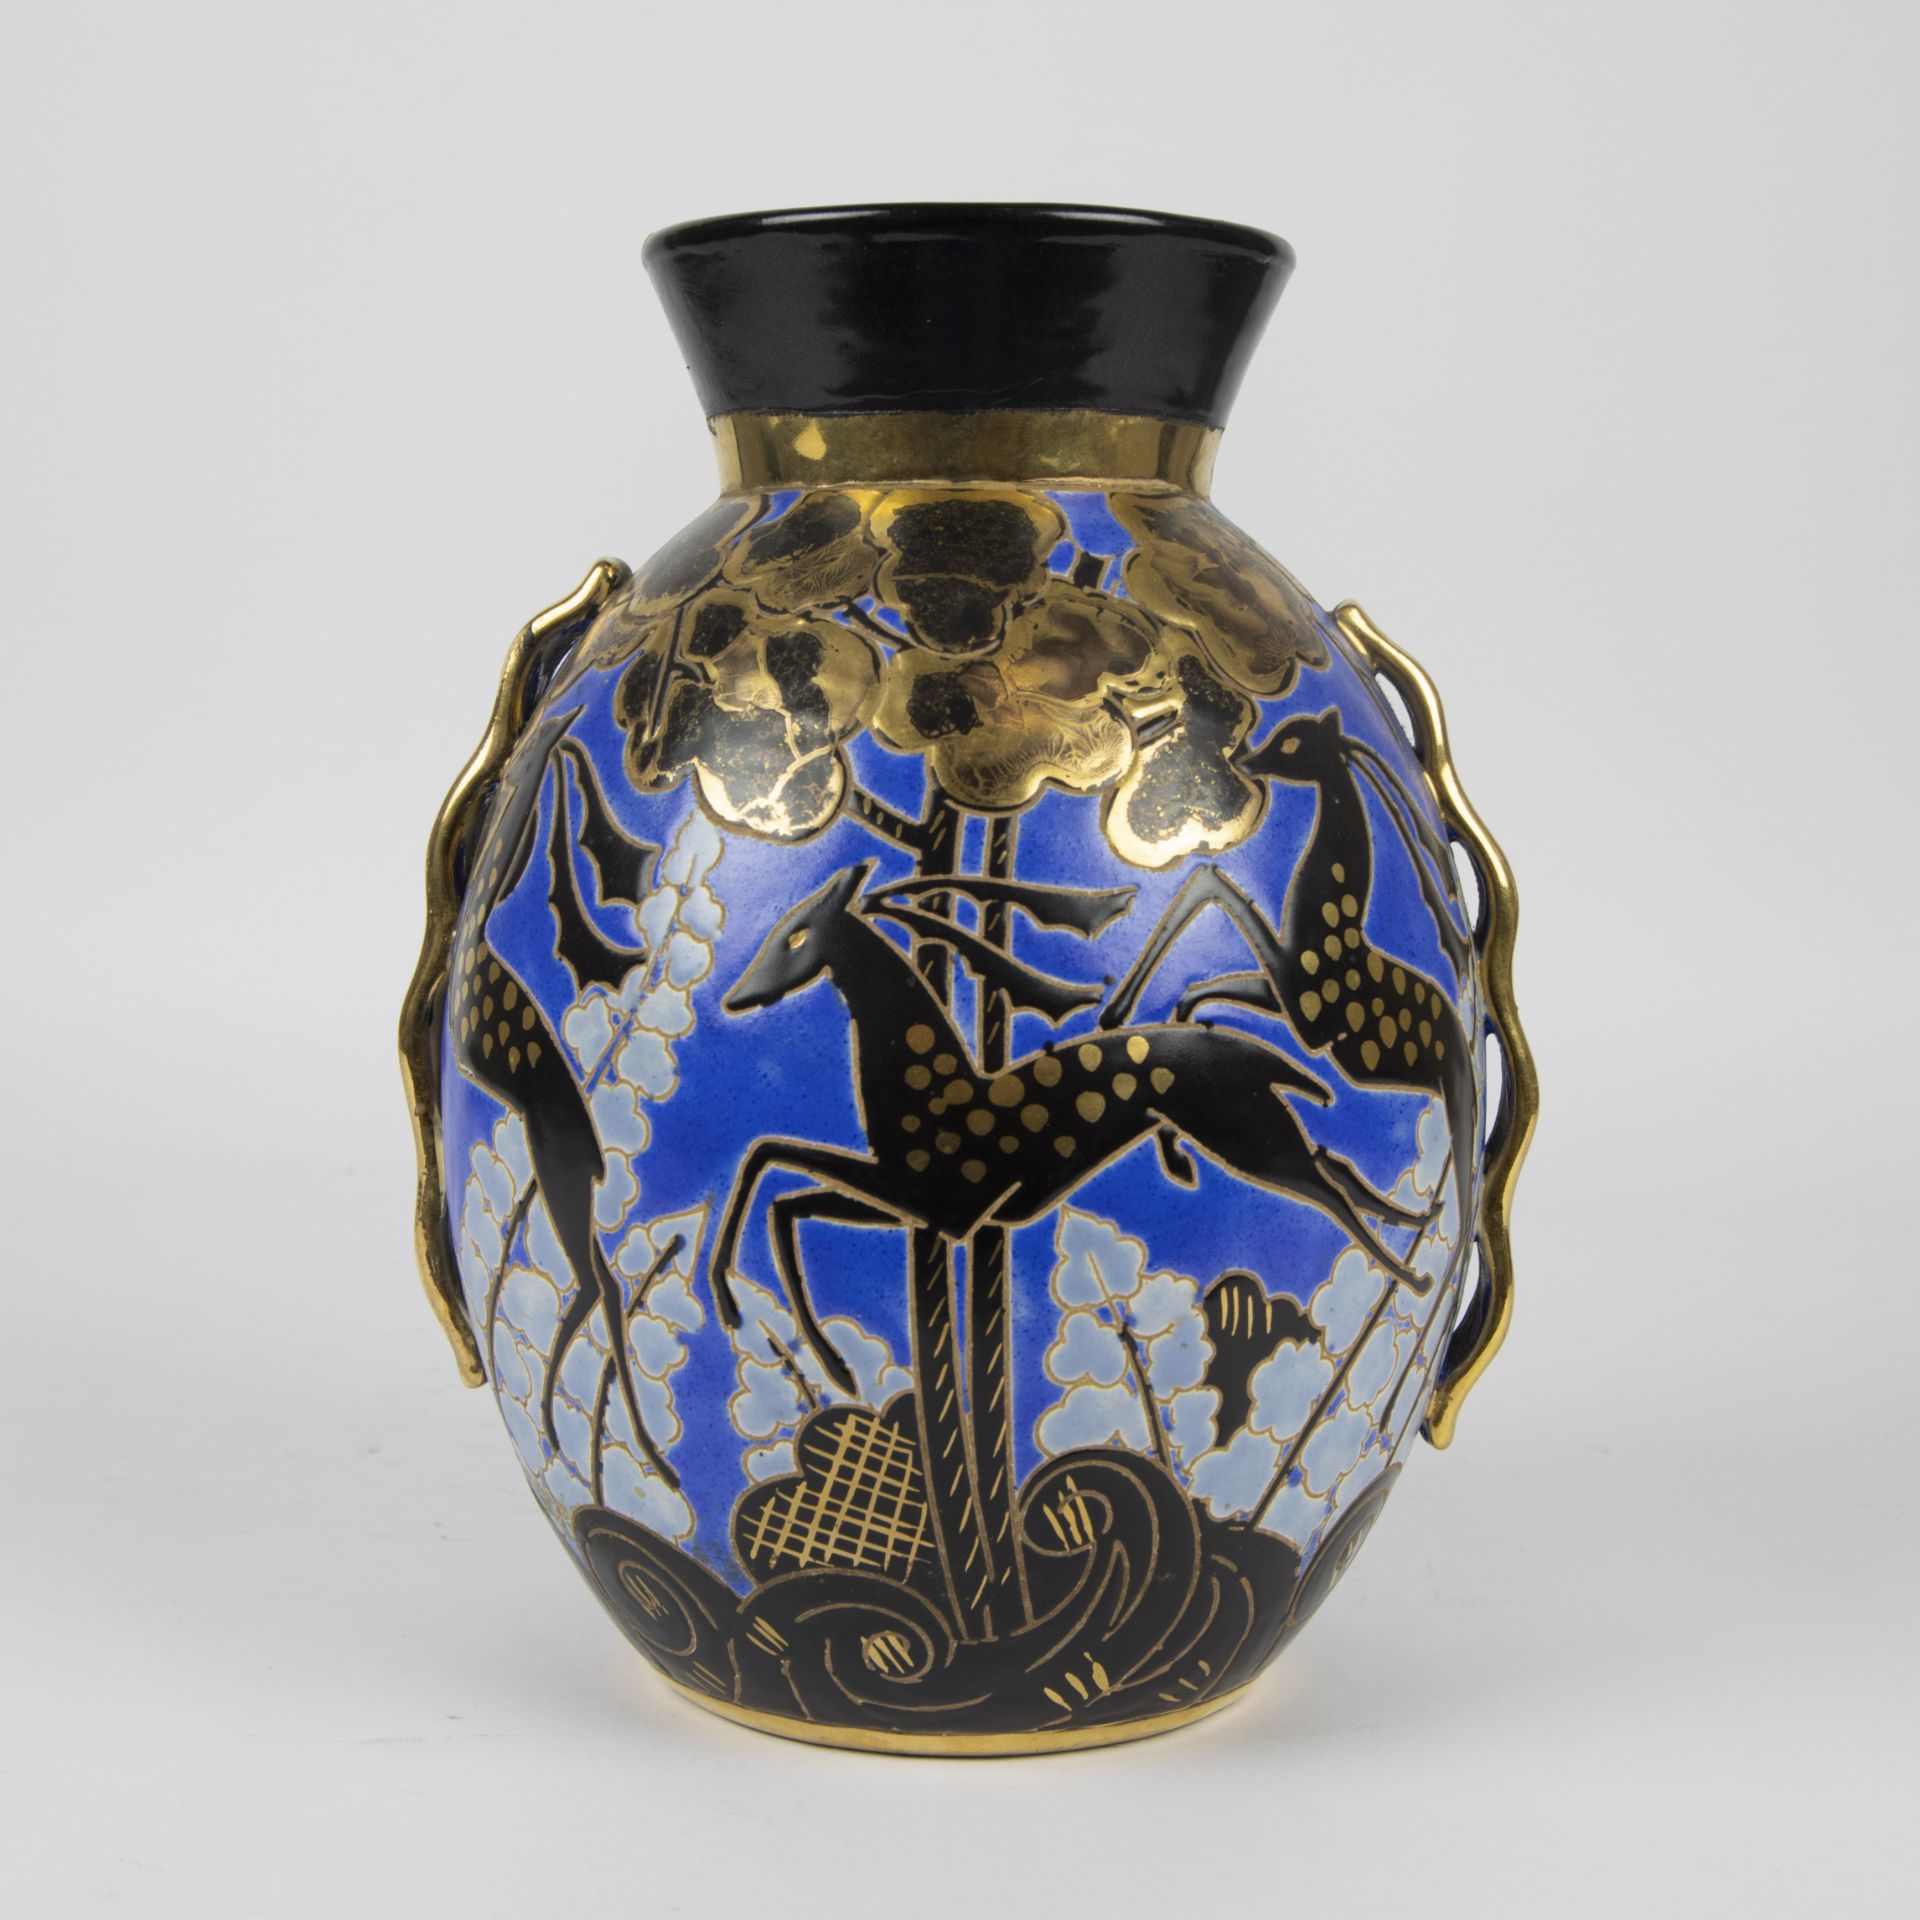 Charles Catteau and Raymond Chevalier for Boch Frères - Art Deco vase